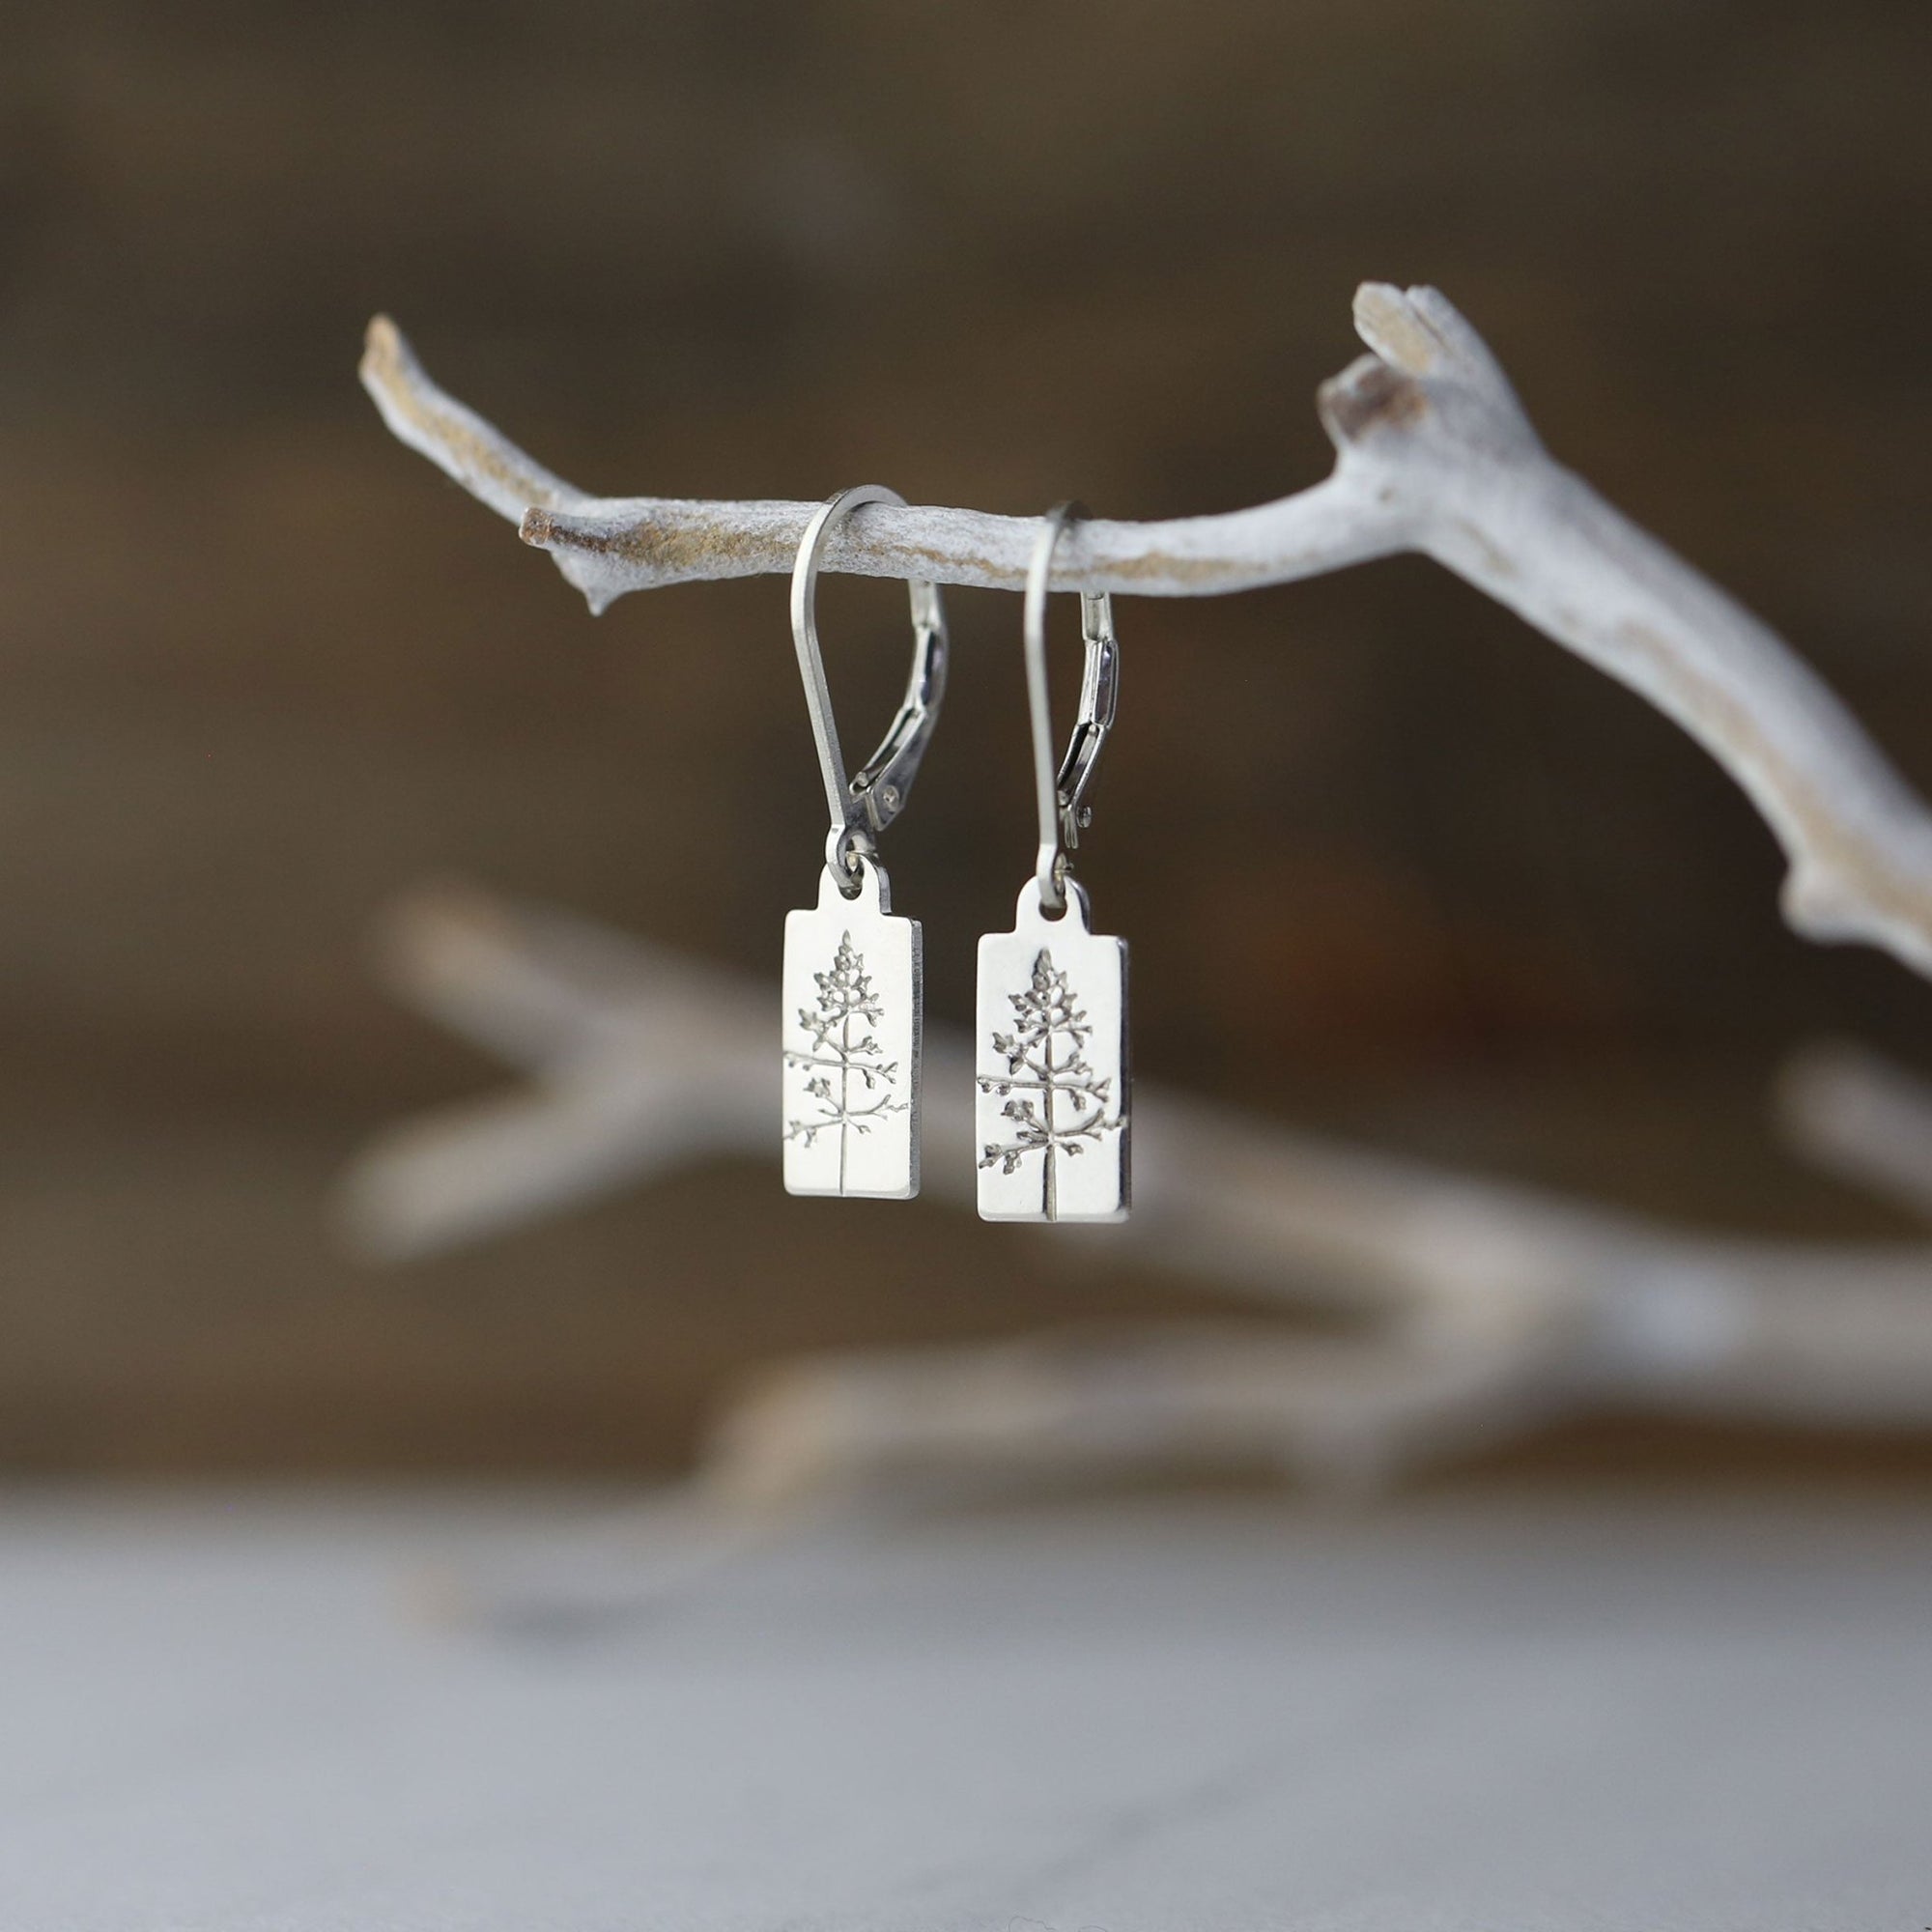 Hand Stamped Silver Tree Lever-back Earrings